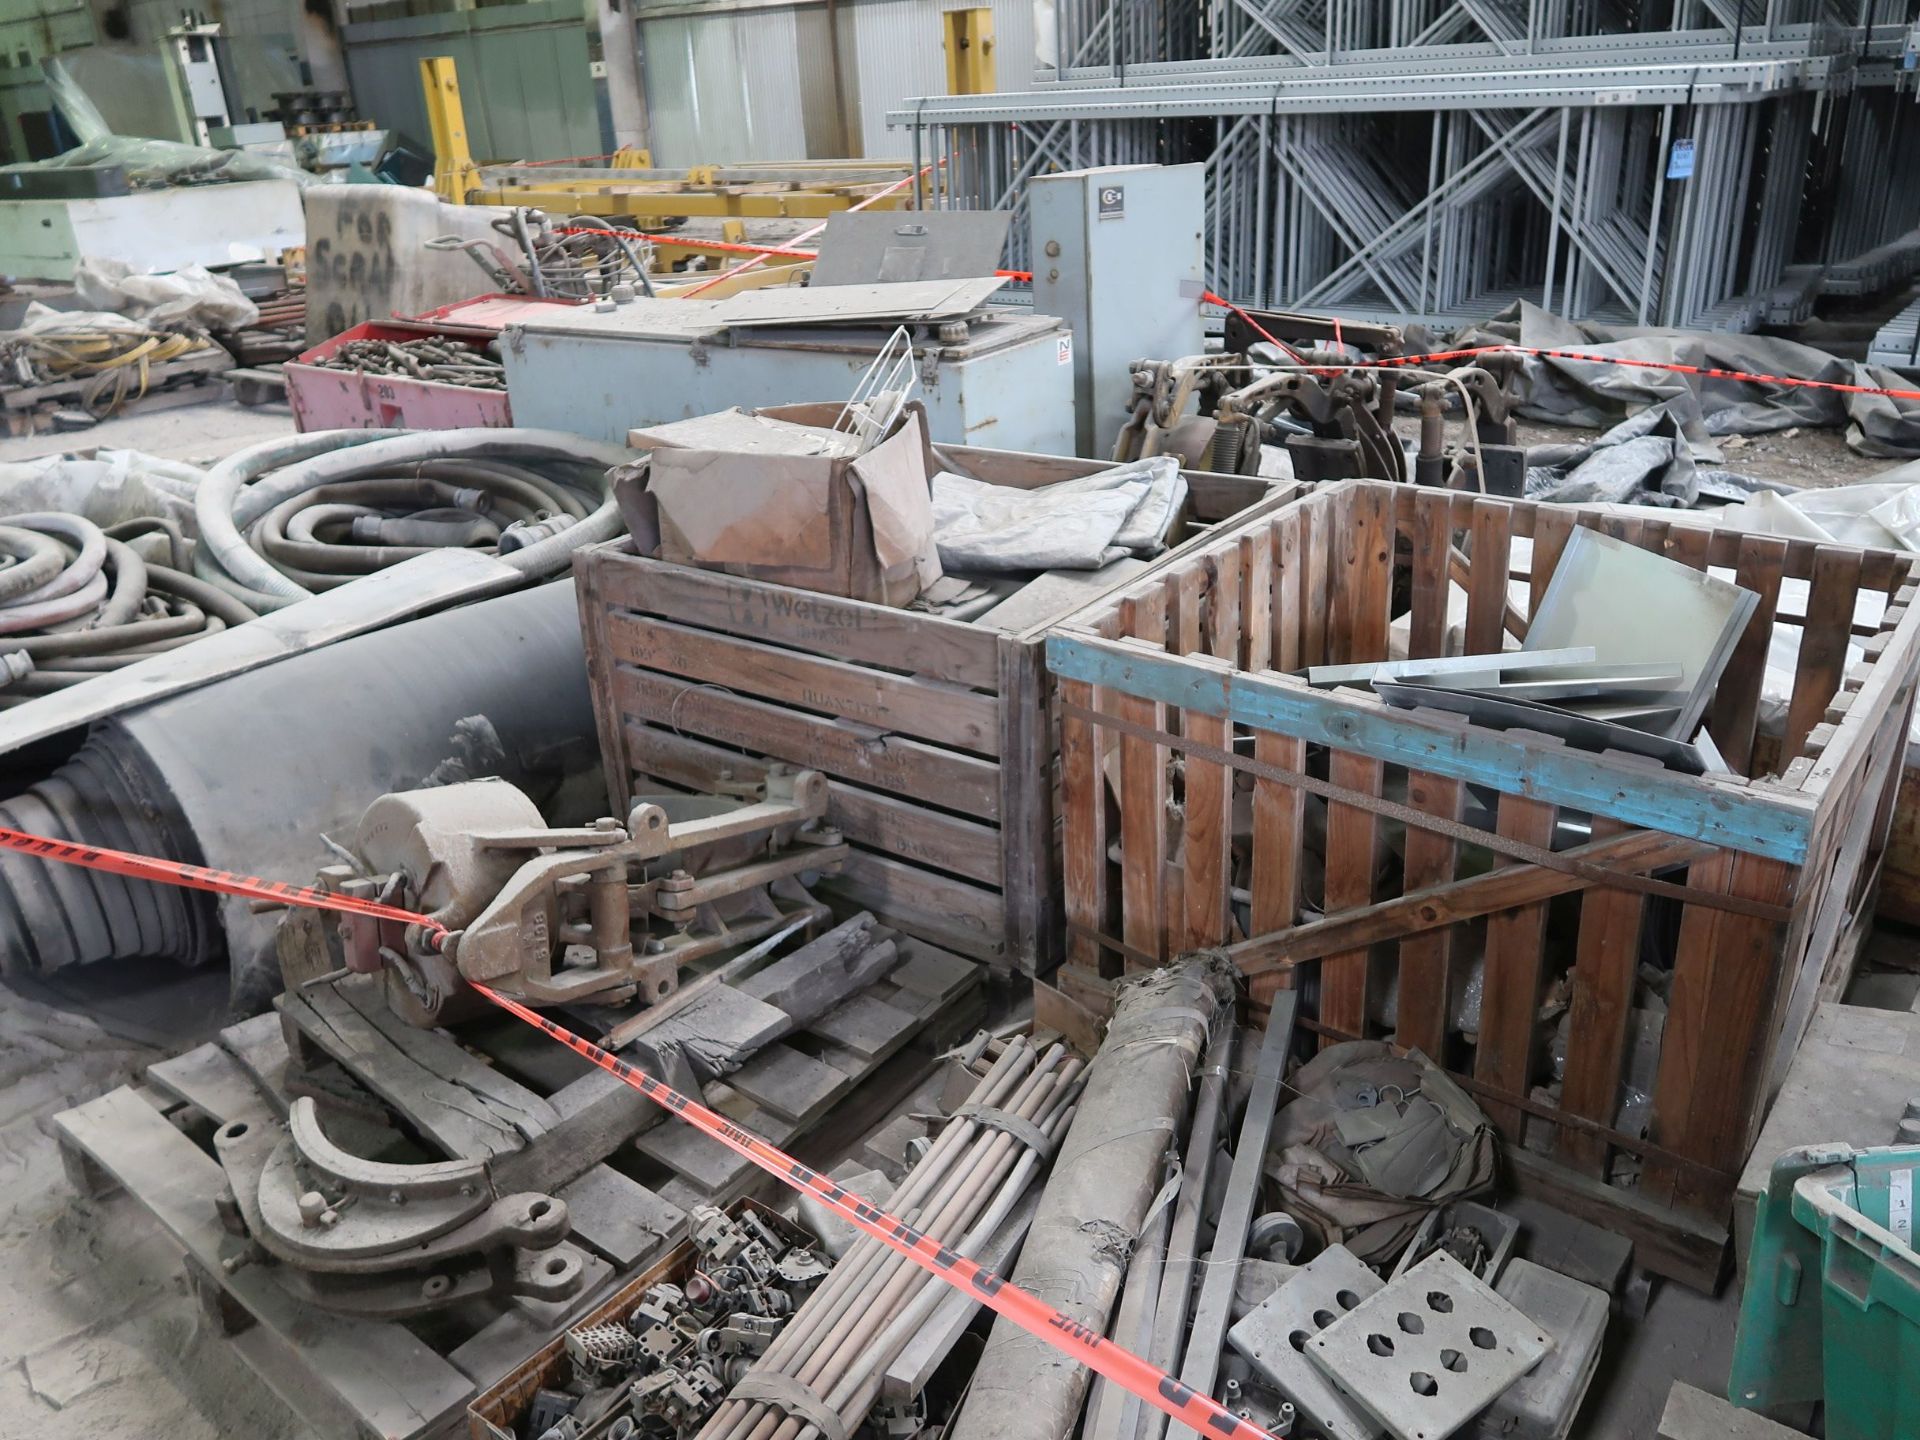 (LOT) LARGE QUANTITY OF HARDWARE, ELECTRIAL, HOSE, DRILLS AND OTHER ON APPROX. (50) SKIDS - Image 2 of 3